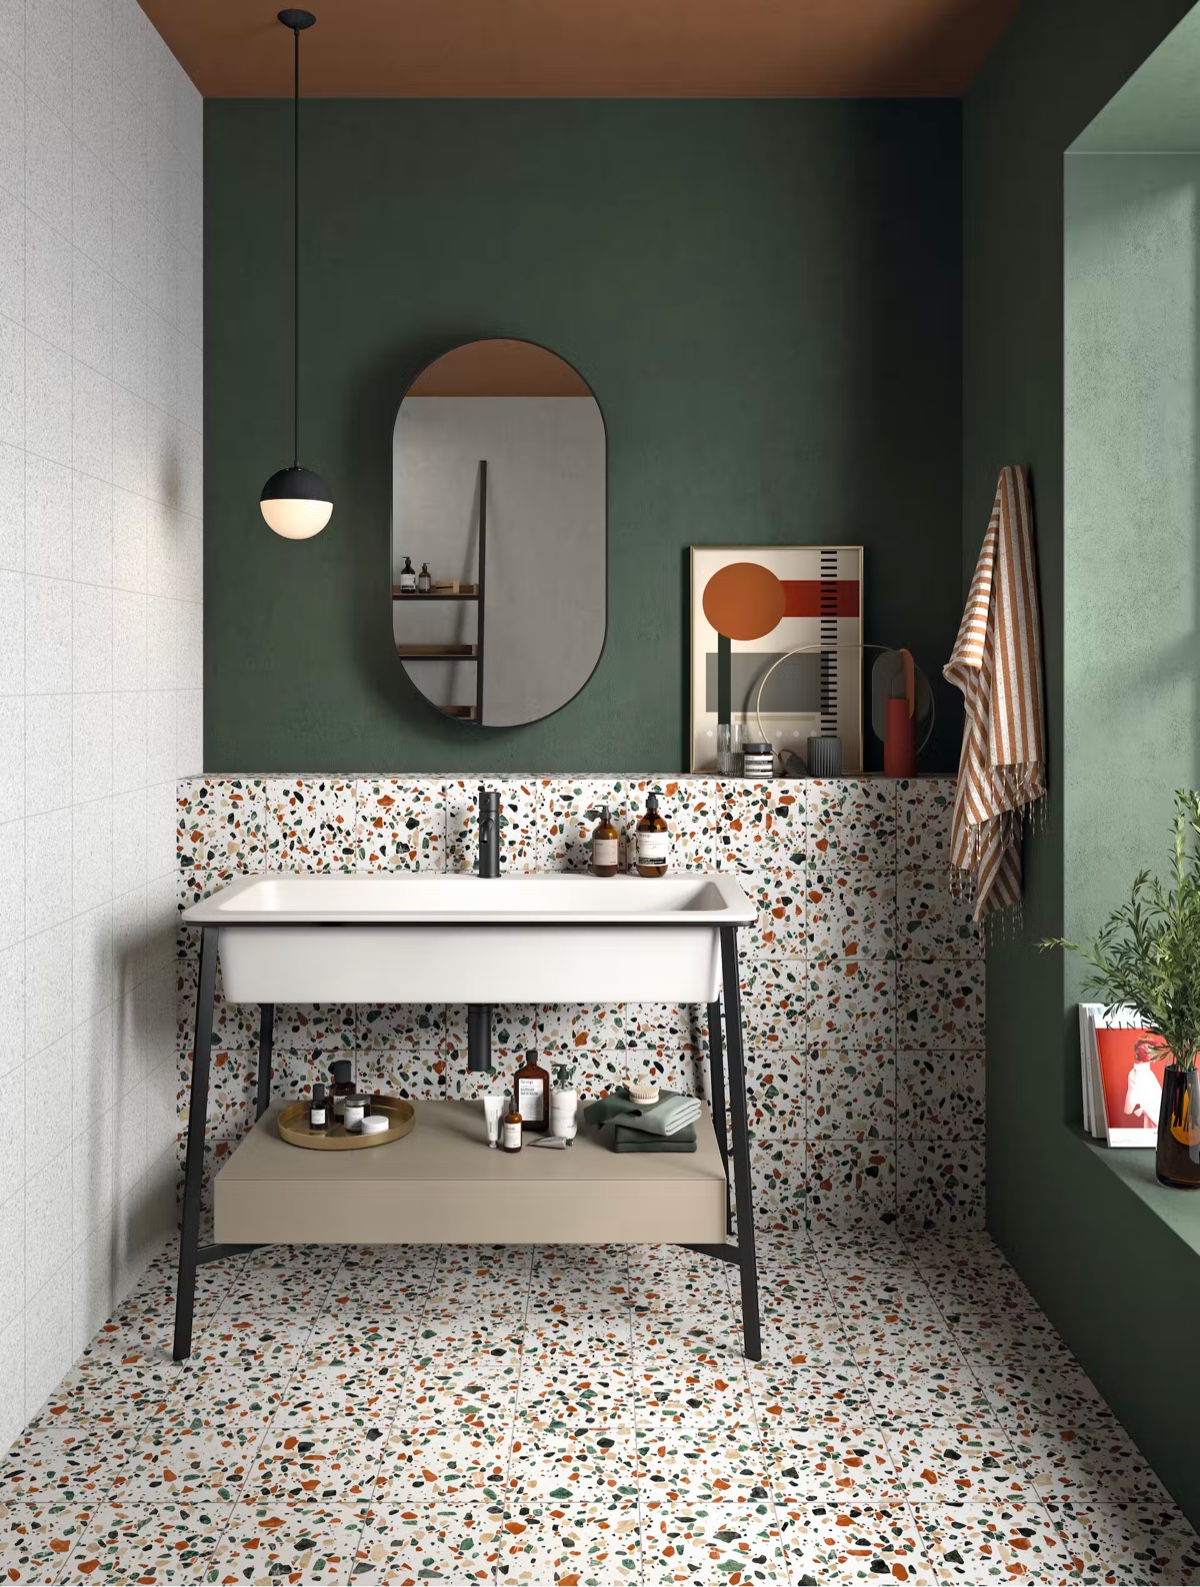 Terrazzo tiles layer patterns over these forest green walls to attain a fashion-forward image. A globe bathroom vanity light and a racetrack vanity mirror complete the concept.